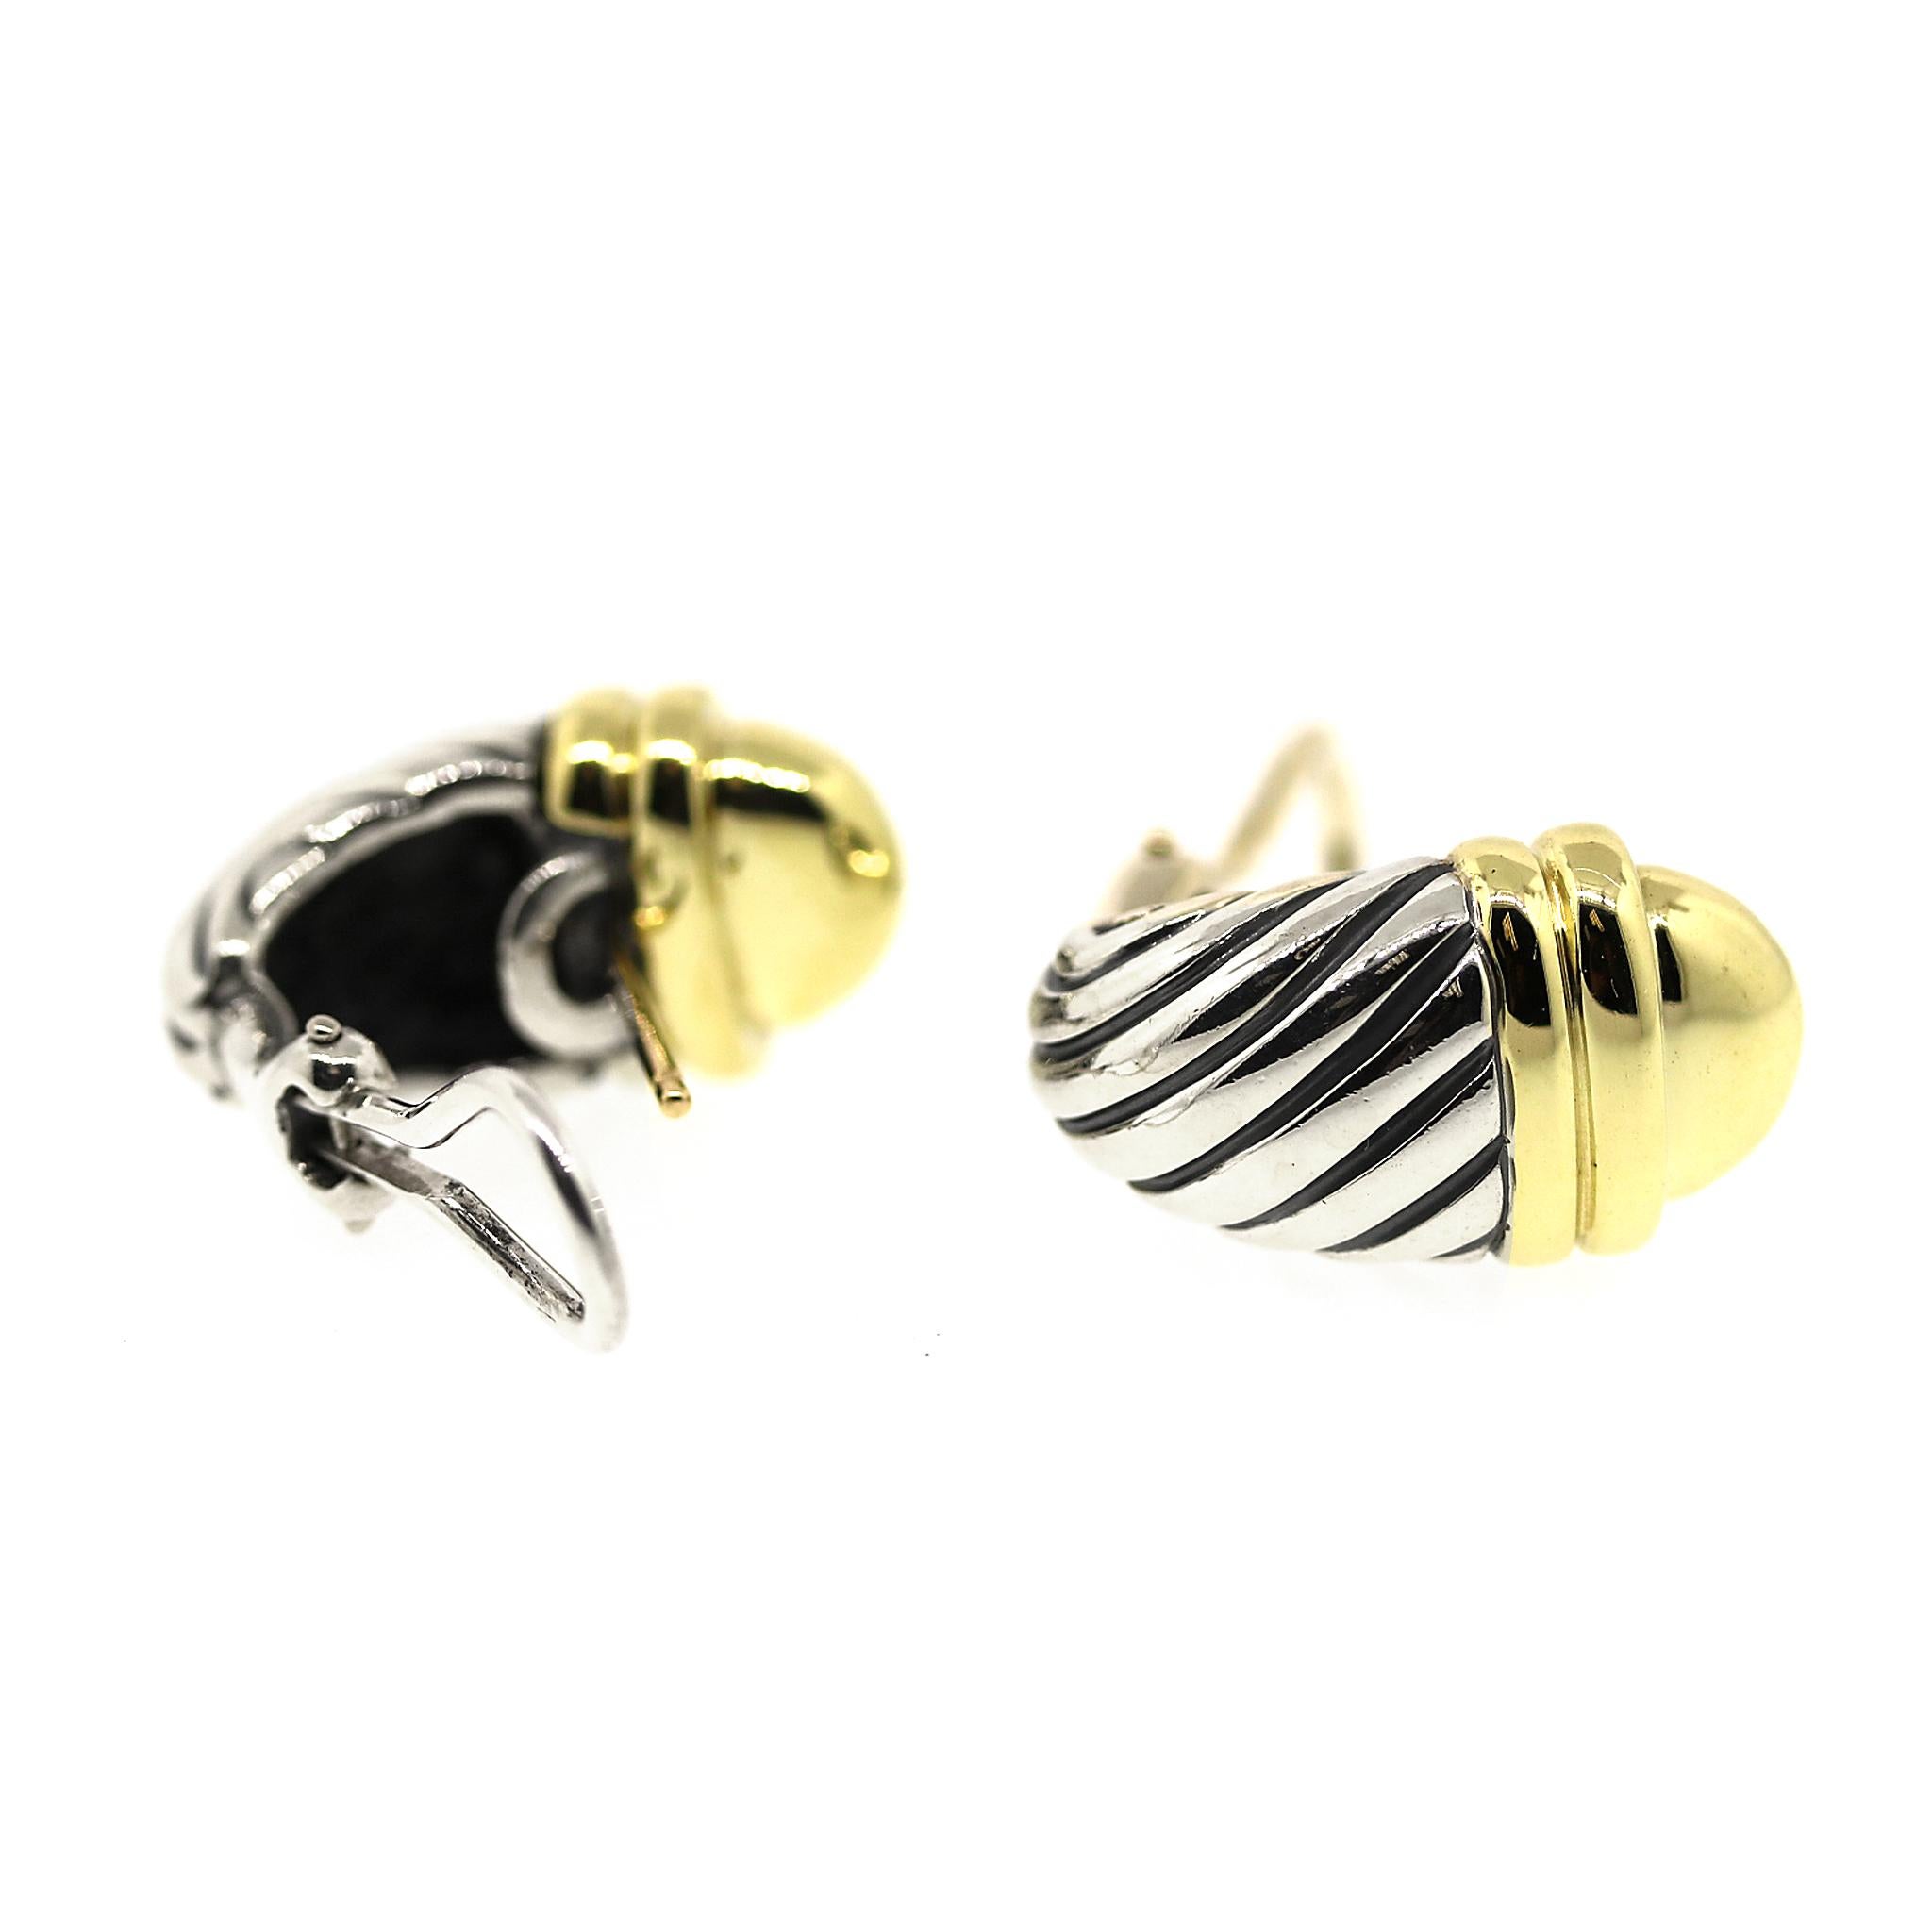 Women's David Yurman Cable Shrimp Earrings in Sterling Silver and 14k Yellow Gold